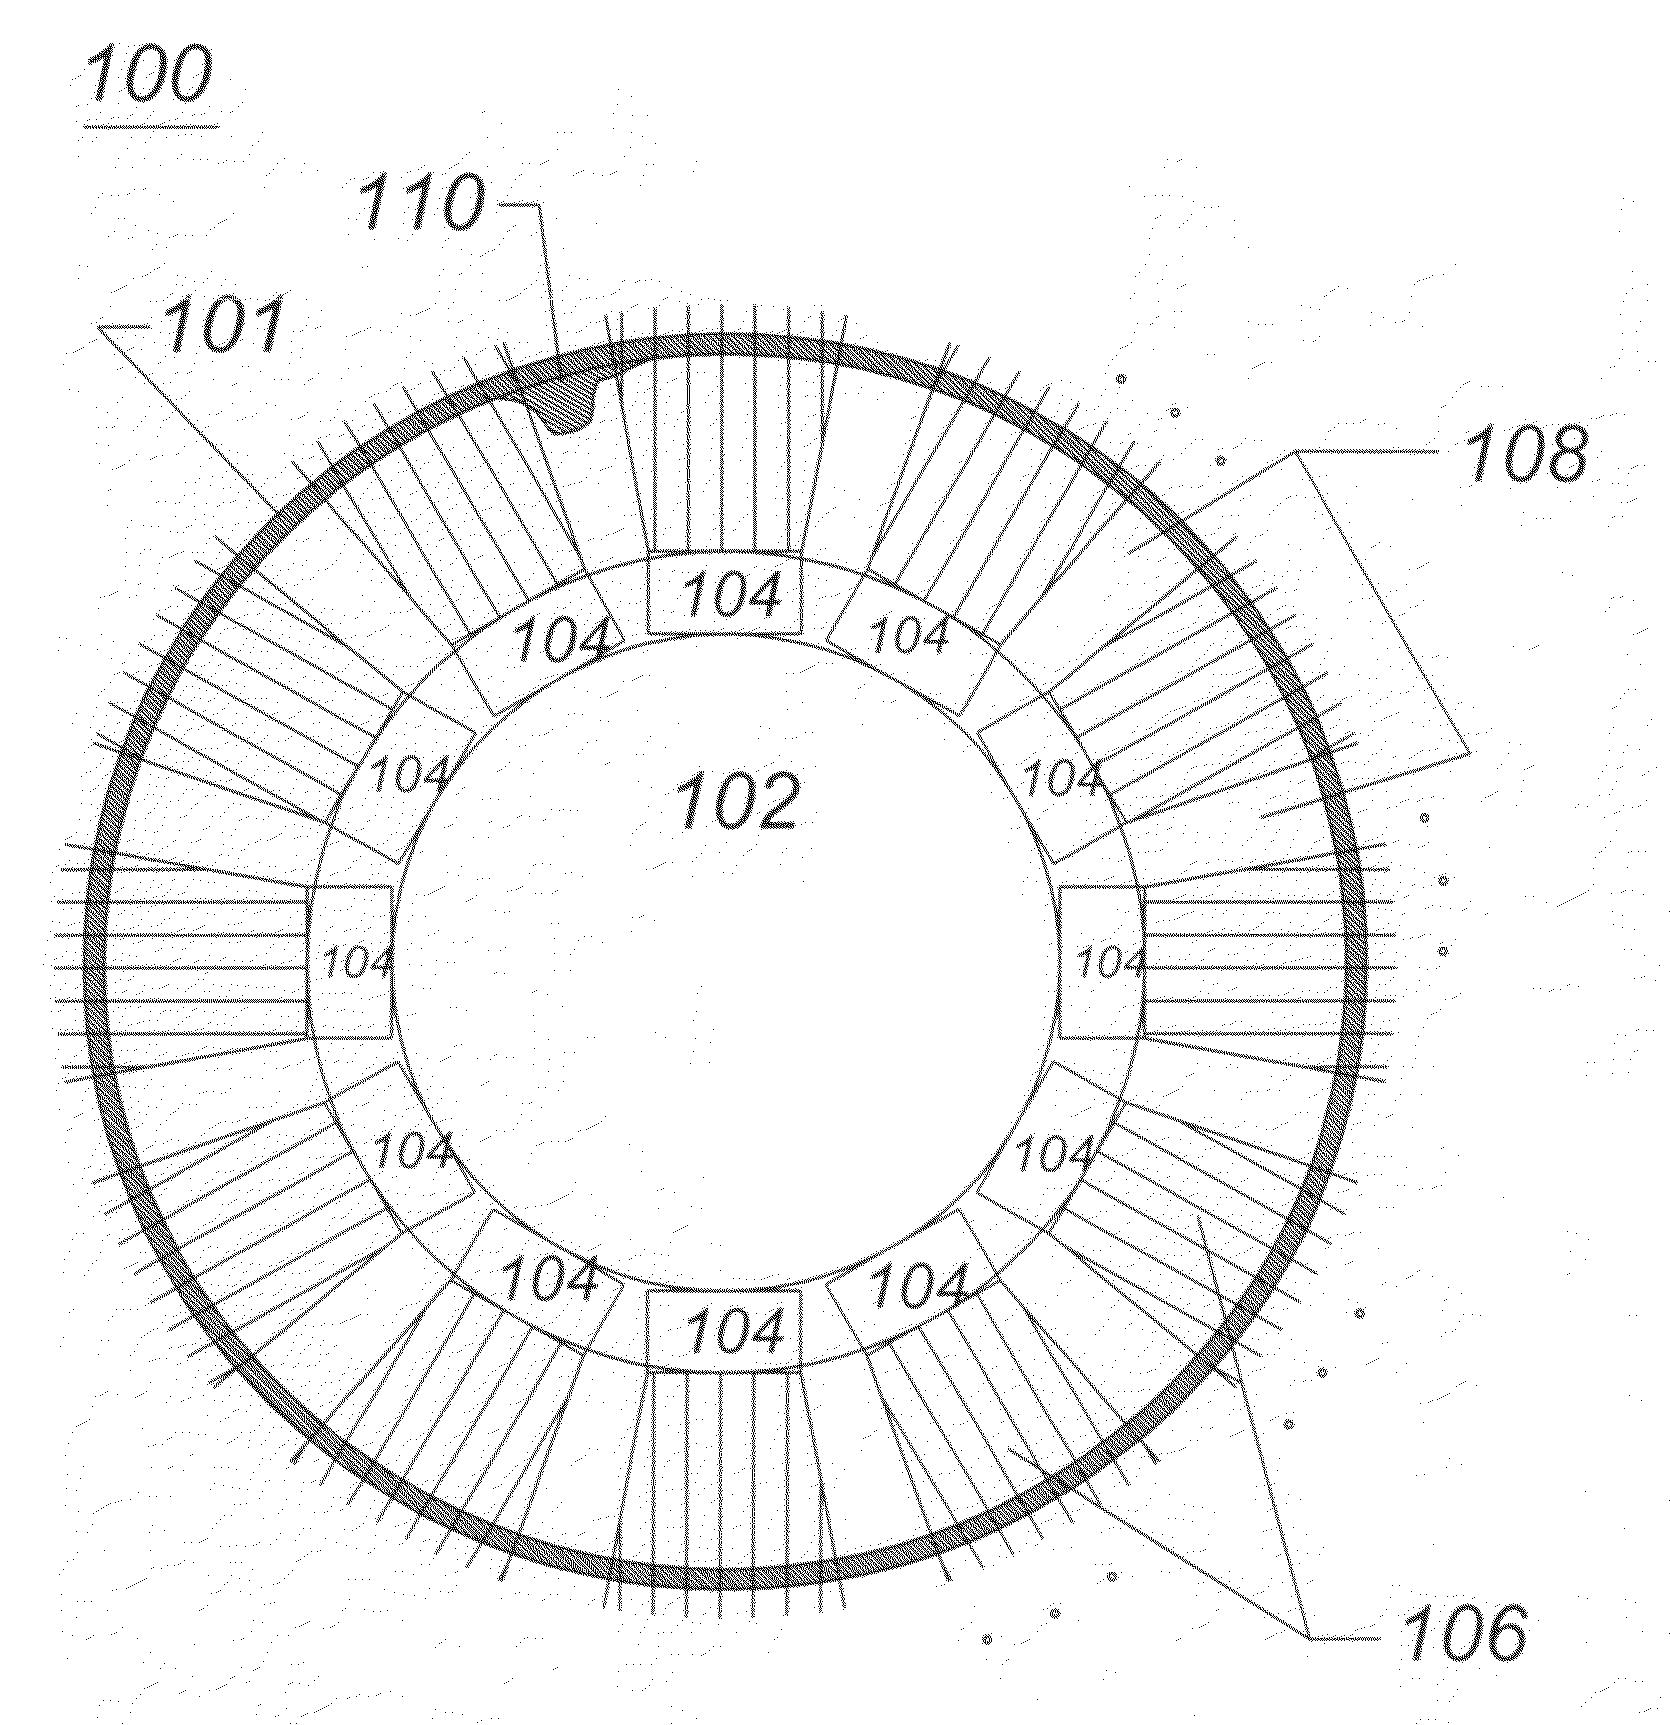 Reslution optical & ultrasound devices for imaging and treatment of body lumens